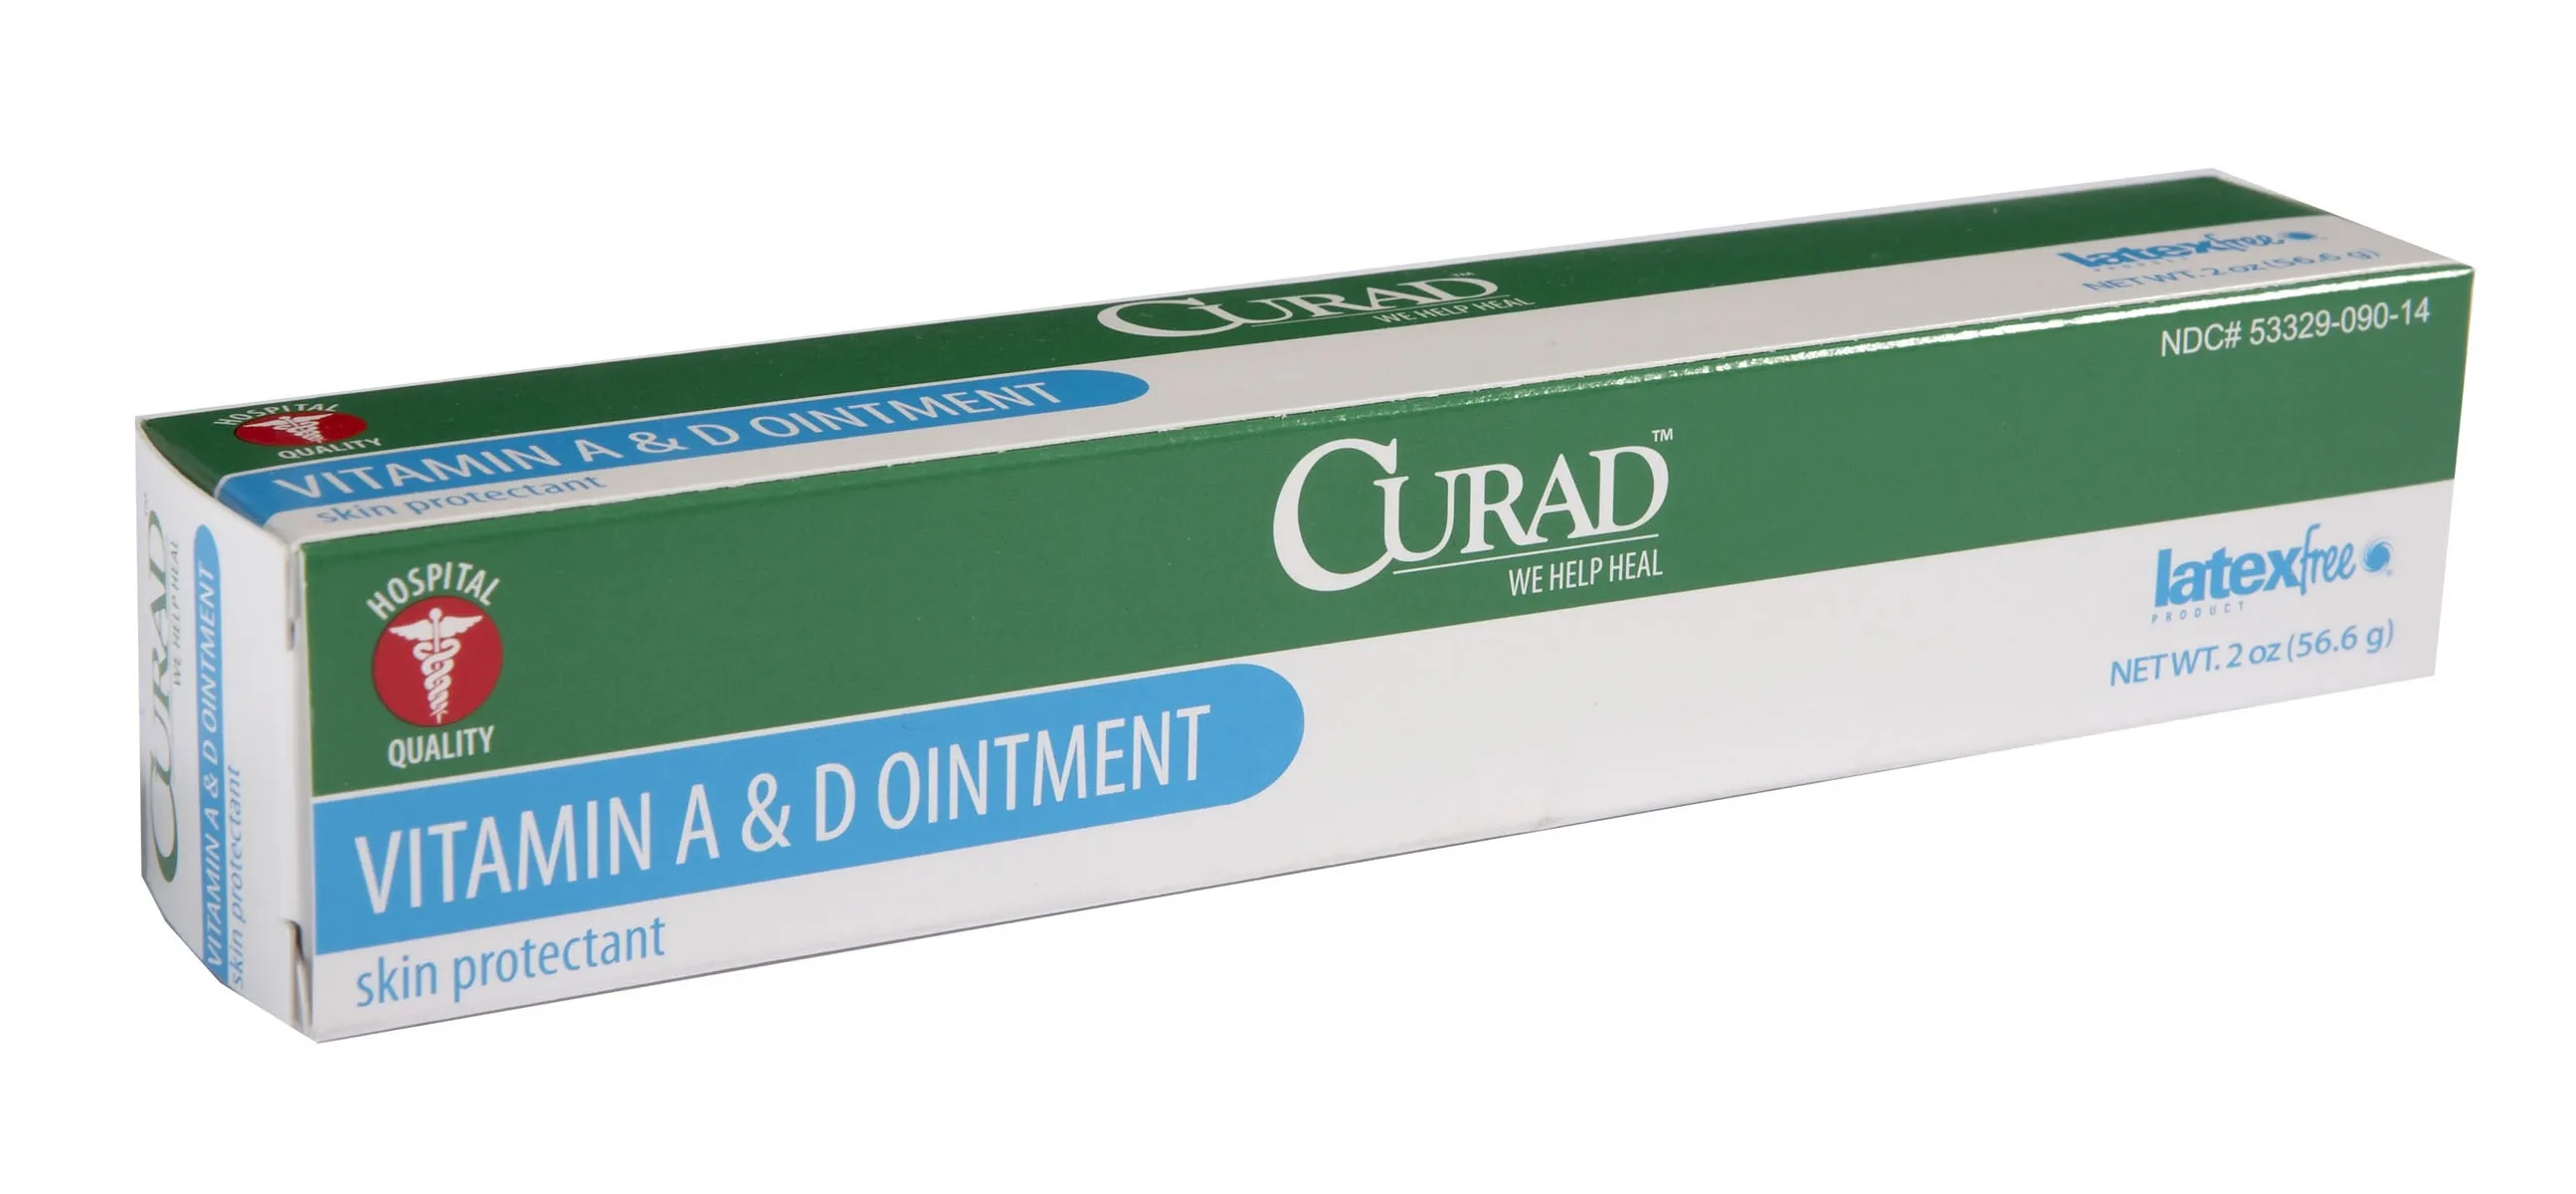 Medline From: CUR005345Z To: CUR015431H - Curad A&d Ointment Ointment